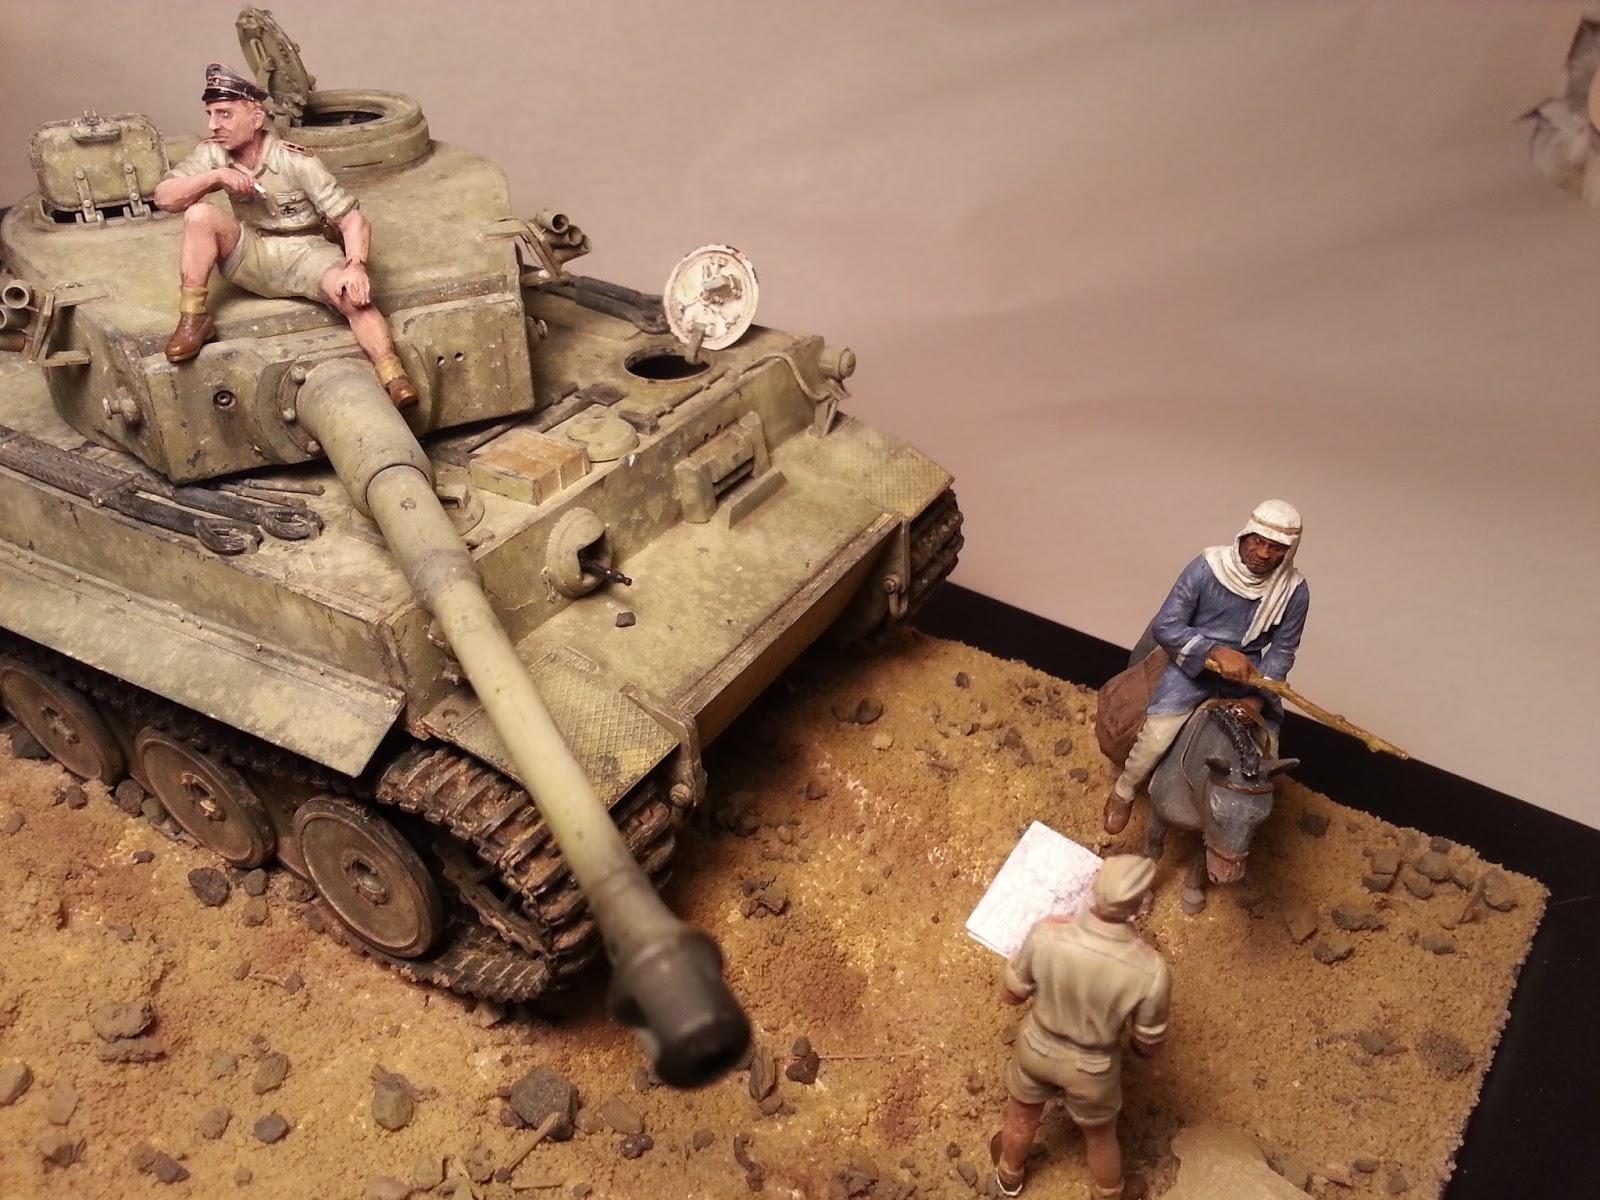 Dave S Model Workshop Video Tutorial How To Add A Desert Sand Texture To Diorama Groundwork Part Ii Rocks And Painting,Best Dishwasher